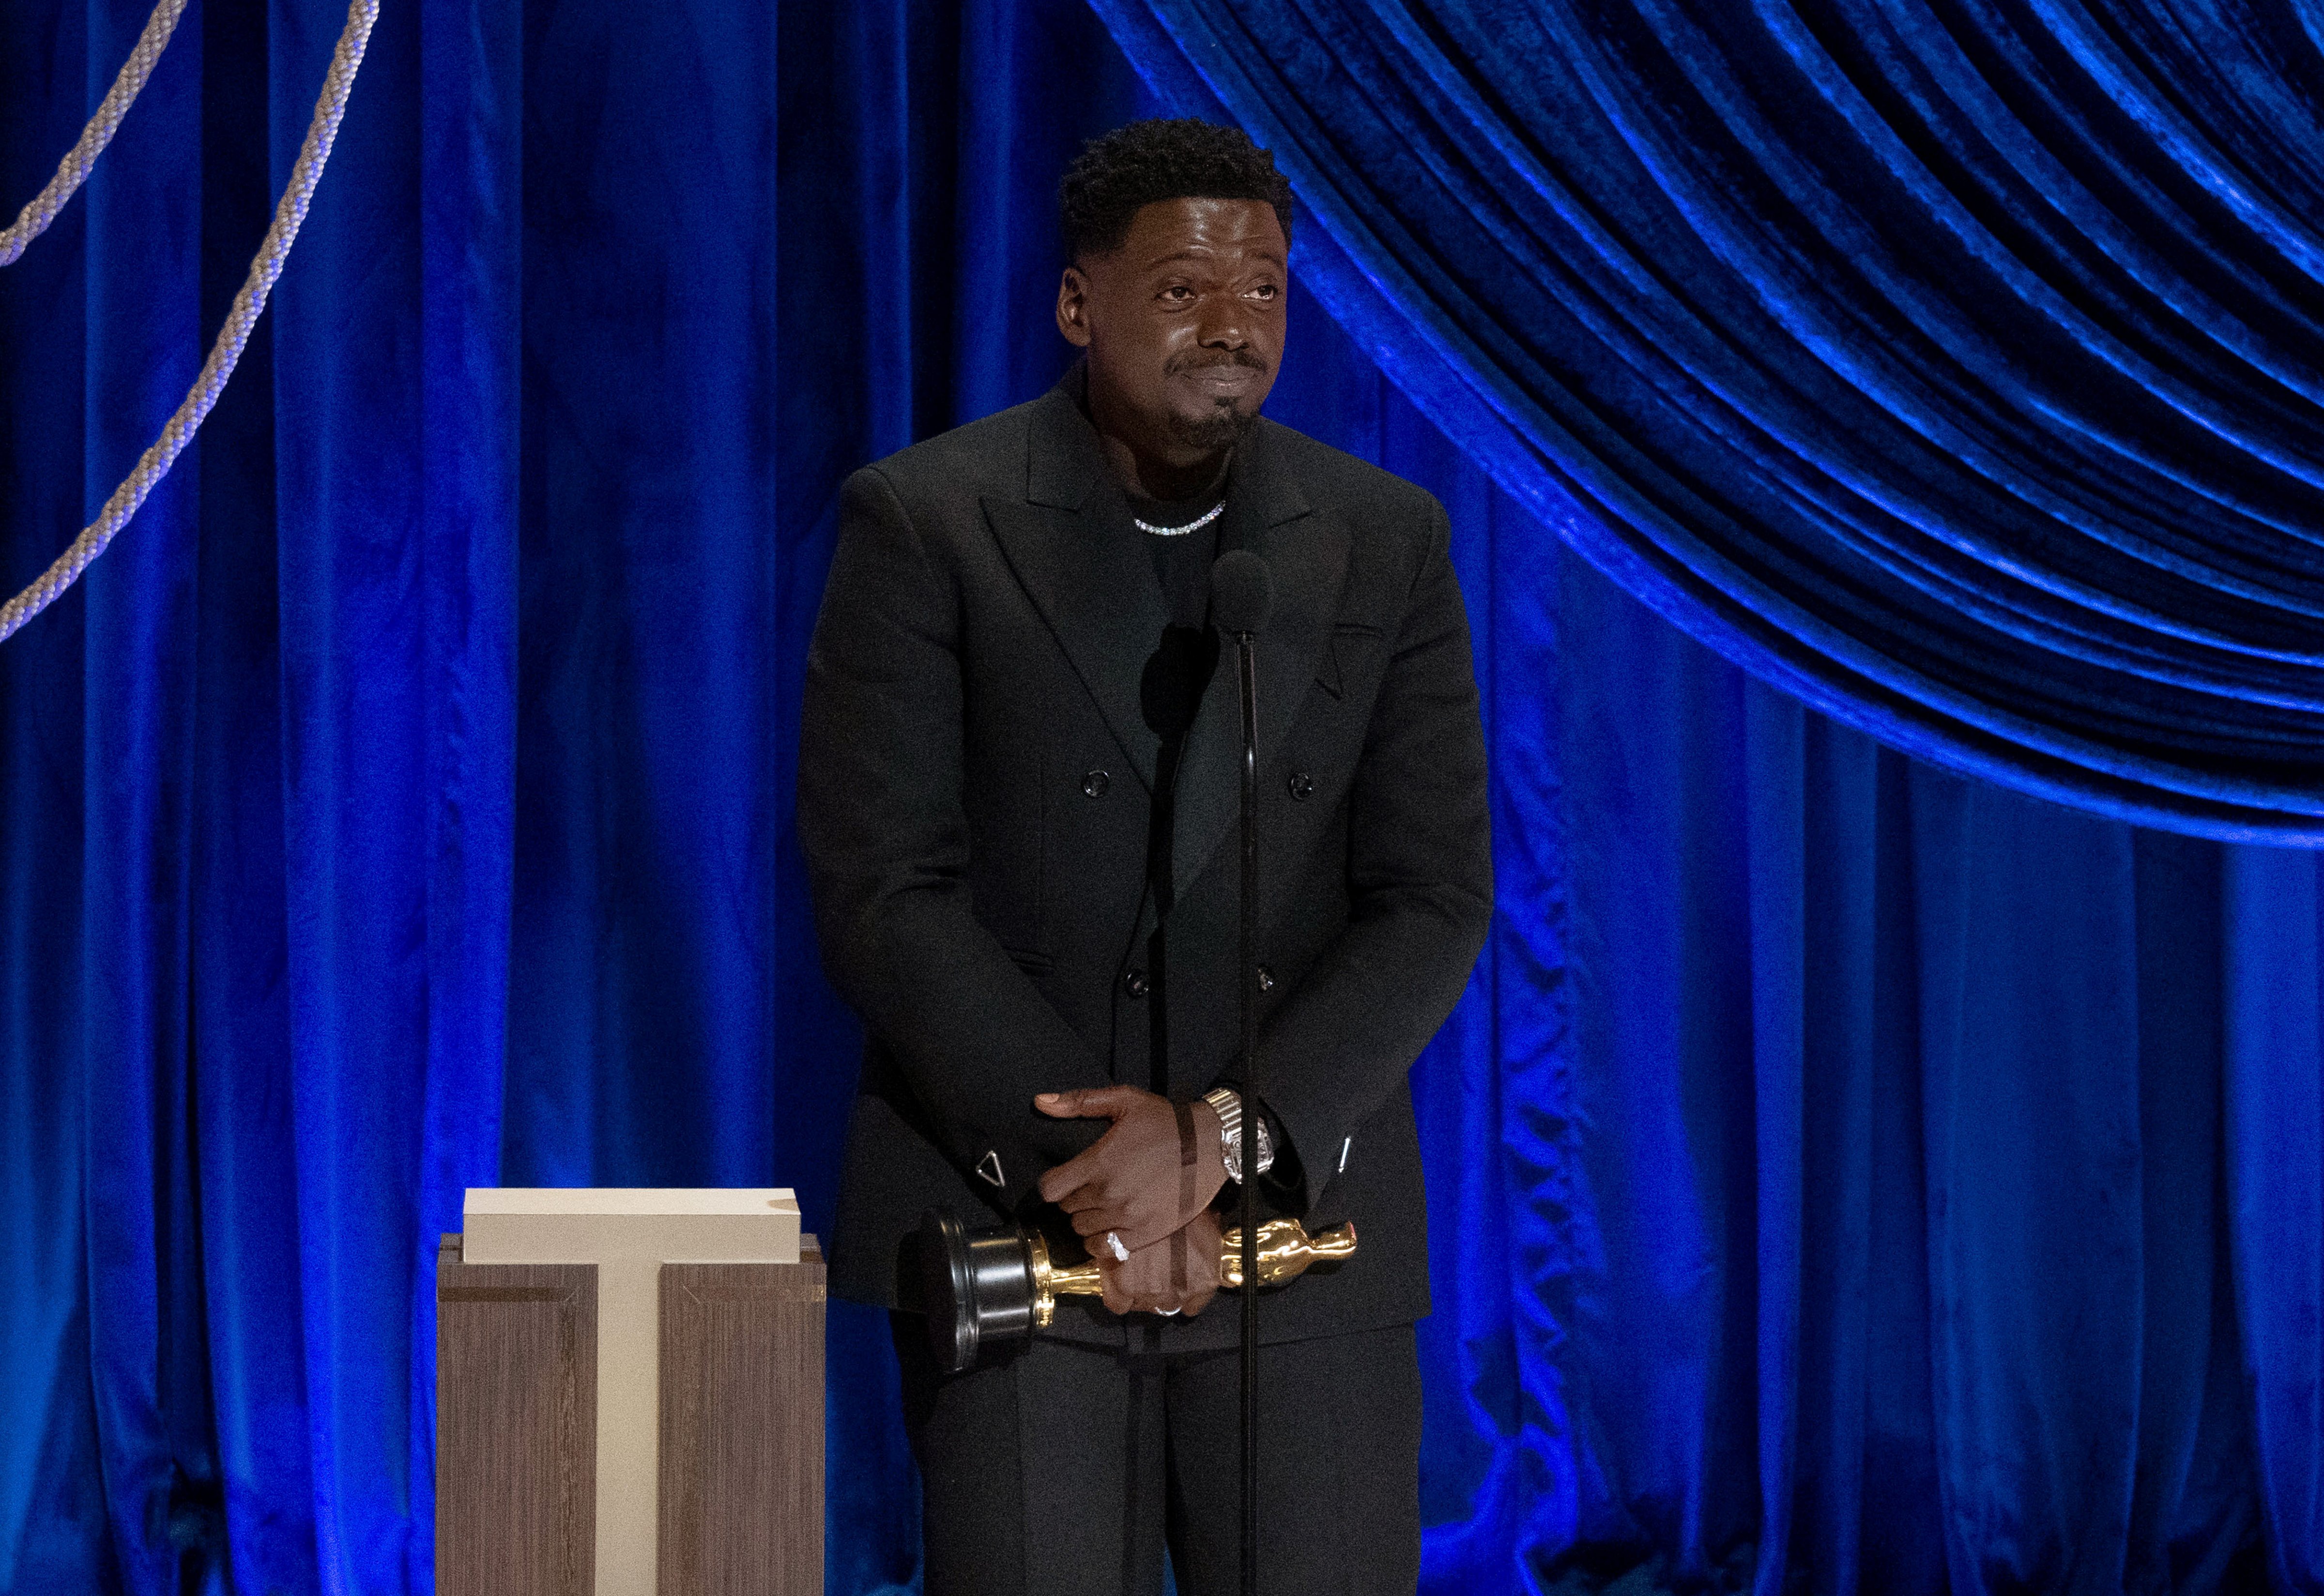 Daniel Kaluuya accepts the Oscar for Actor in a Supporting Role for 'Judas and the Black Messiah' during the 93rd Annual Academy Awards on April 25, 2021 (A.M.P.A.S. via Getty Images—2021 A.M.P.A.S.)